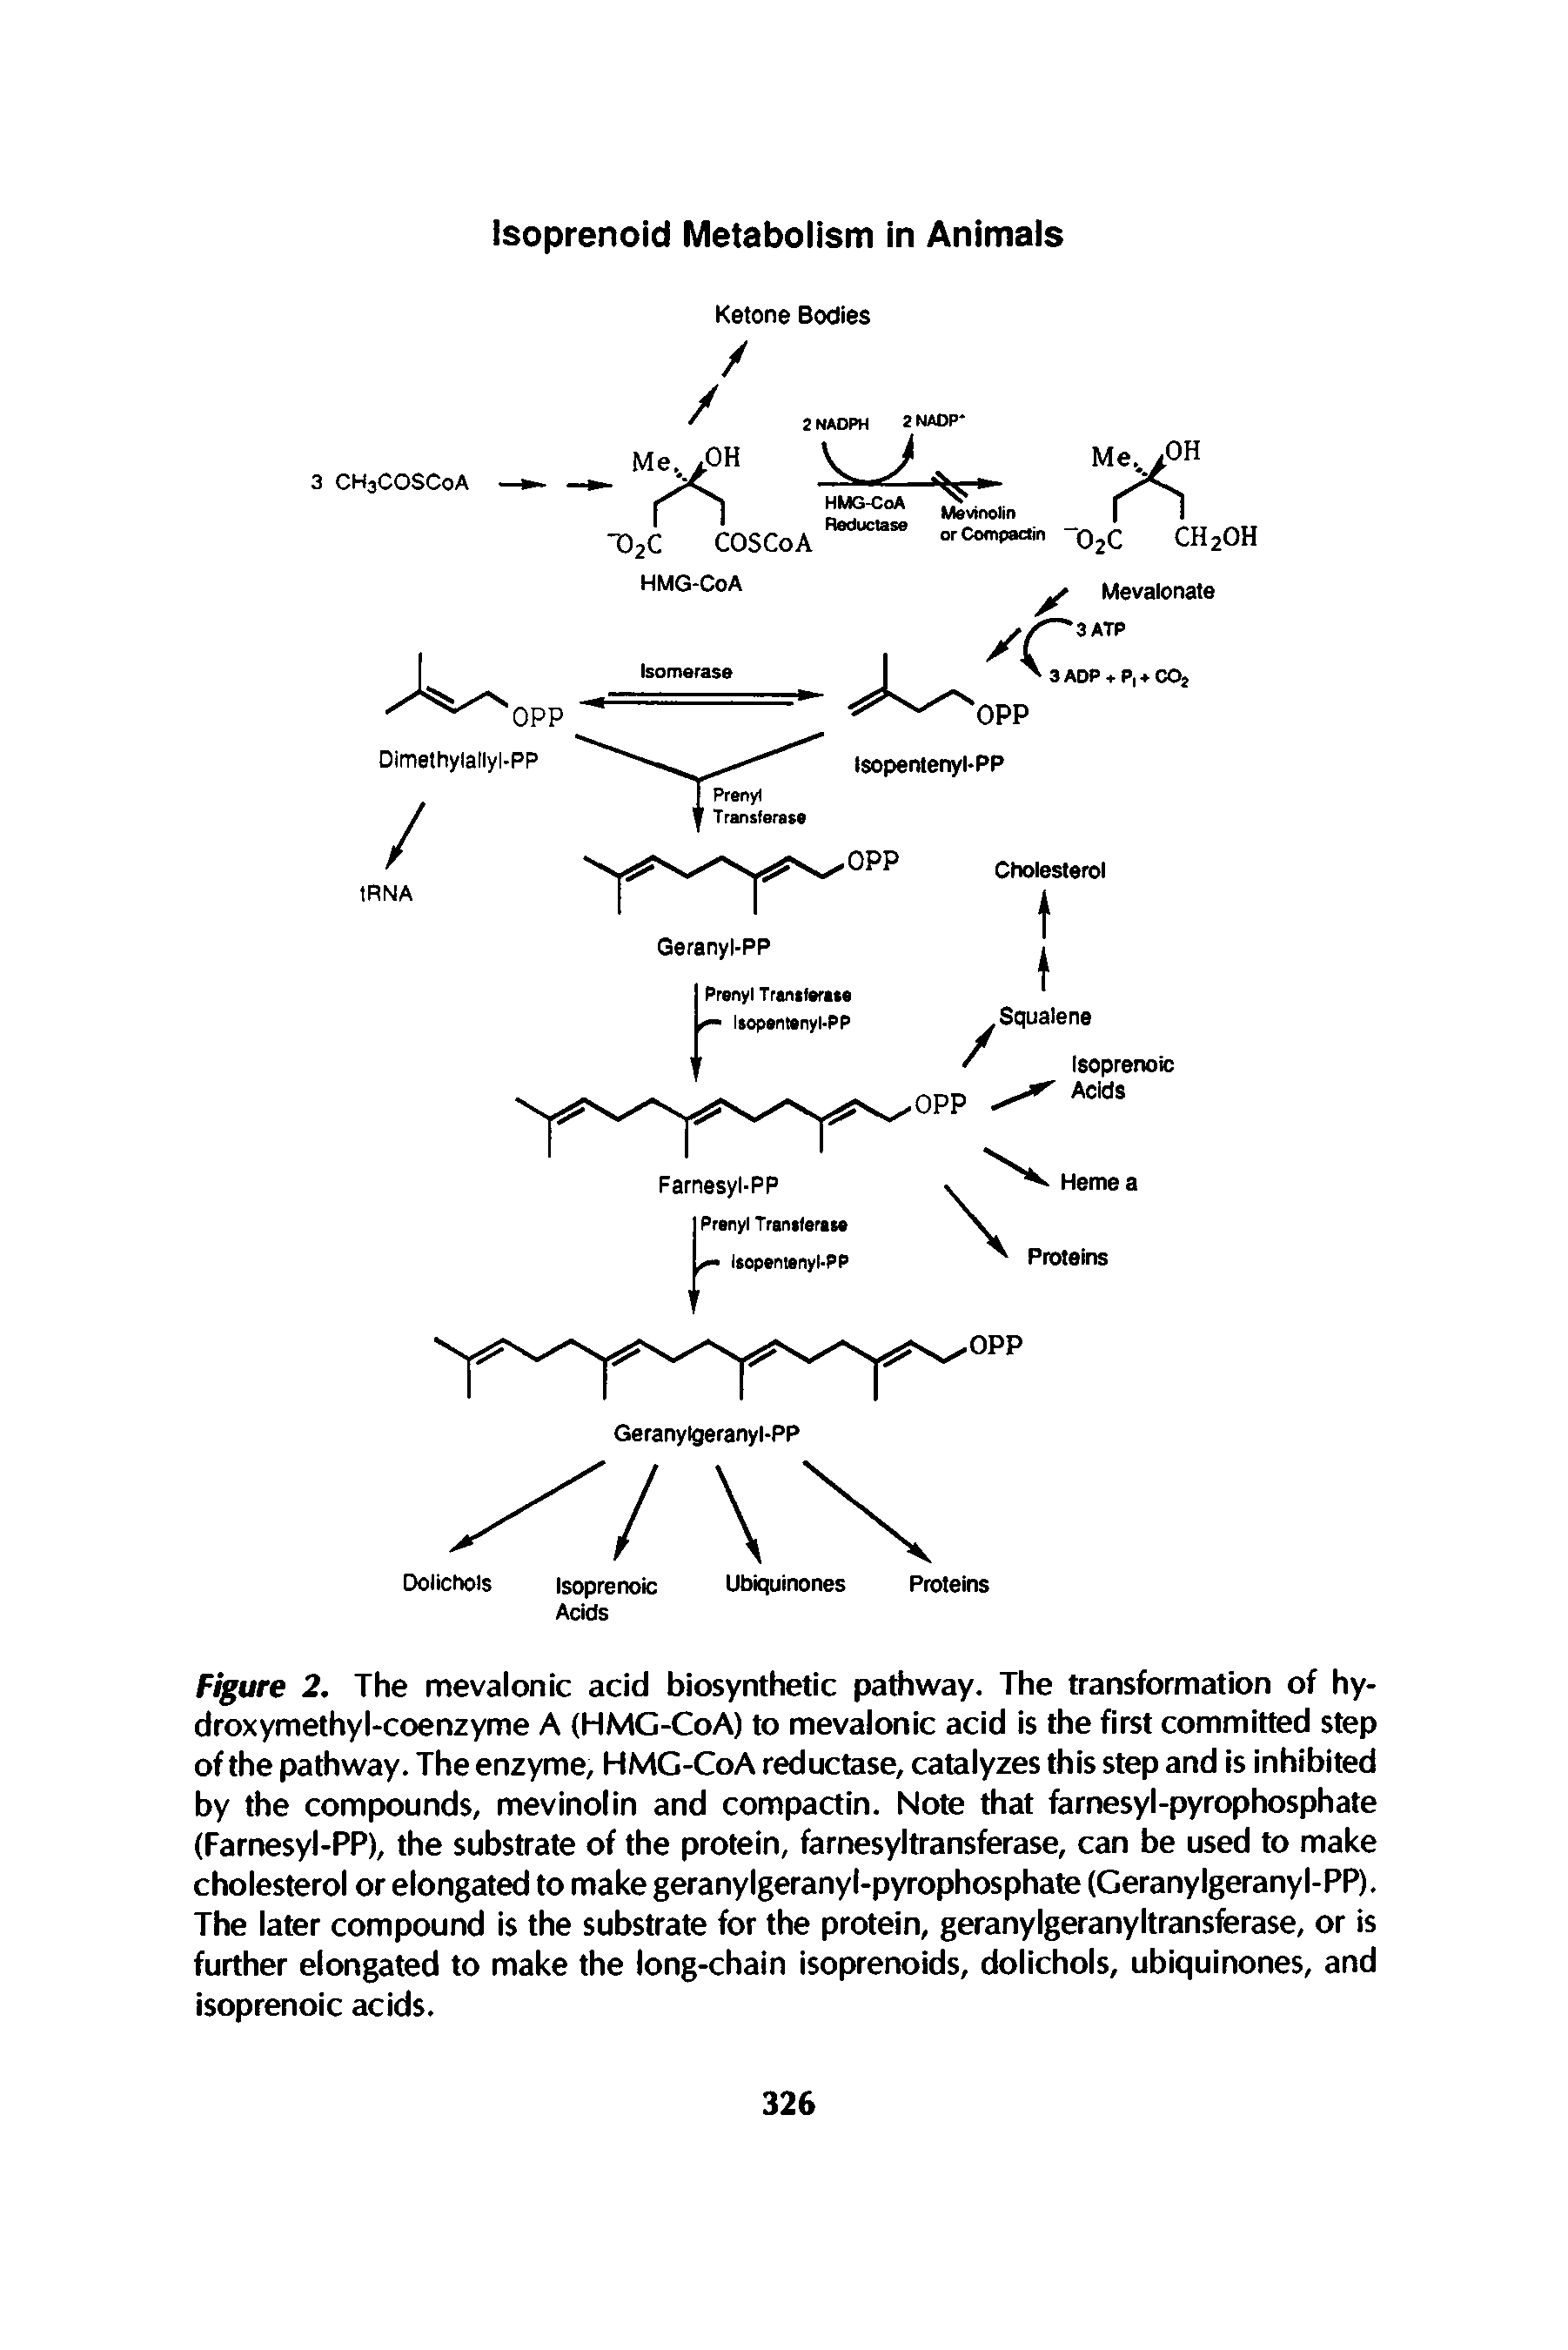 Figure 2. The mevalonic acid biosynthetic pathway. The transformation of hy-droxymethyl-coenzyme A (HMG-CoA) to mevalonic acid is the first committed step of the pathway. The enzyme, HMG-CoA reductase, catalyzes this step and is inhibited by the compounds, mevinolin and compactin. Note that farnesyl-pyrophosphate (Farnesyl-PP), the substrate of the protein, farnesyltransferase, can be used to make cholesterol or elongated to make geranylgeranyl-pyrophosphate (Geranylgeranyl-PP). The later compound is the substrate for the protein, geranylgeranyltransferase, or is further elongated to make the long-chain isoprenoids, dolichols, ubiquinones, and isoprenoic acids.